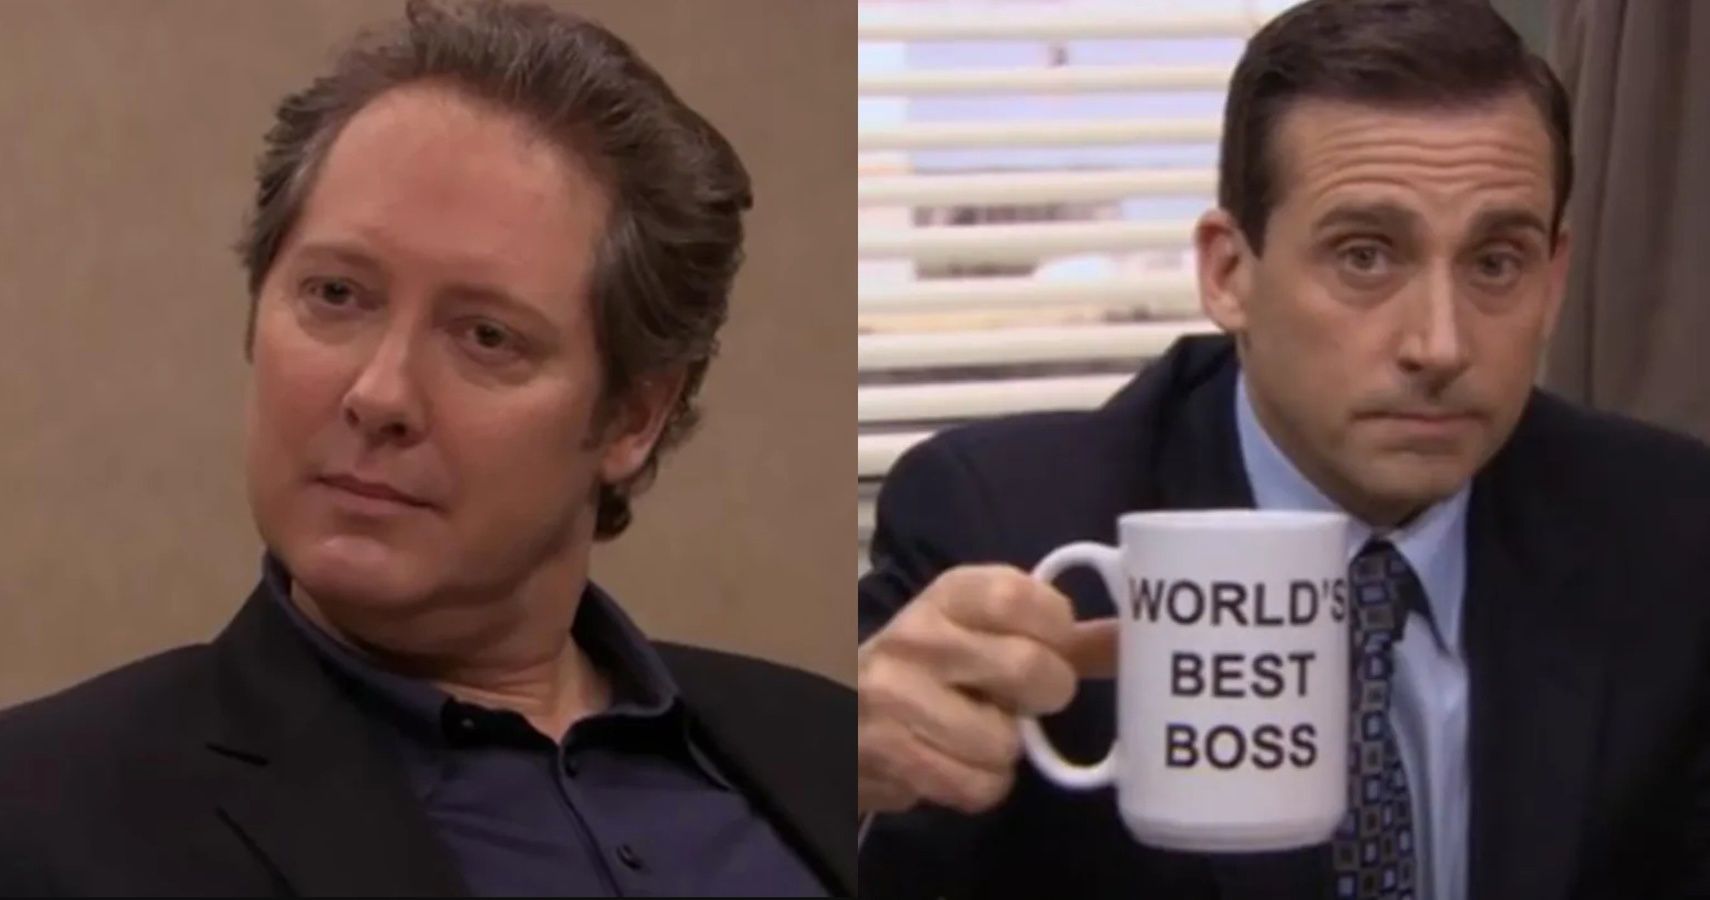 Who was the best boss?